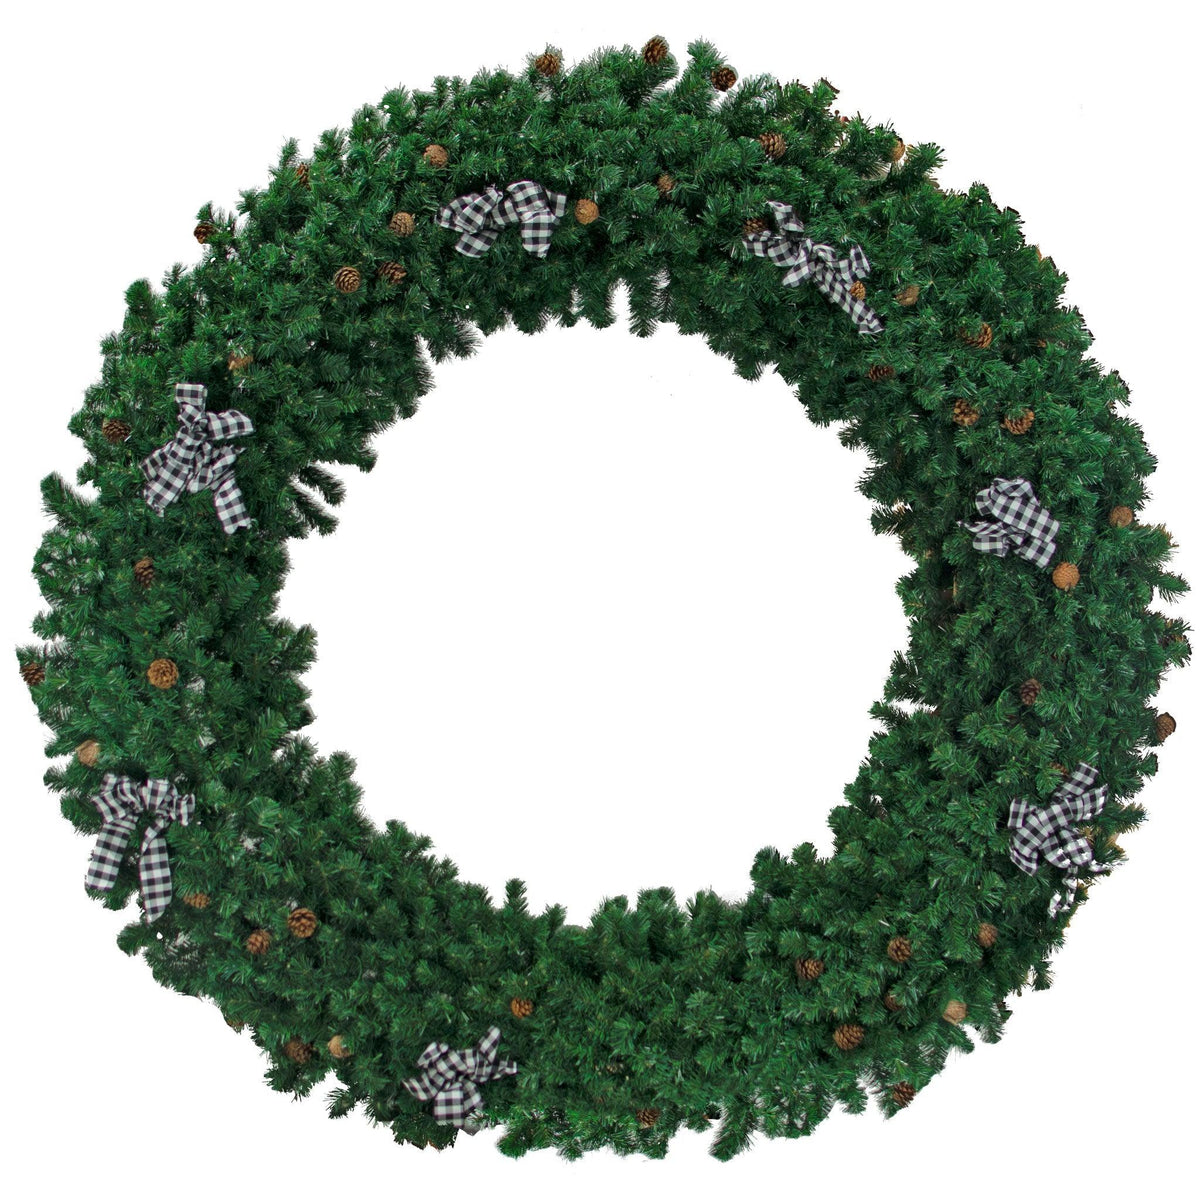 Lee Display's 8FT Outdoor Pine Needle Christmas Wreath in full with the lights turned off.  Available for purchase at leedisplay.com